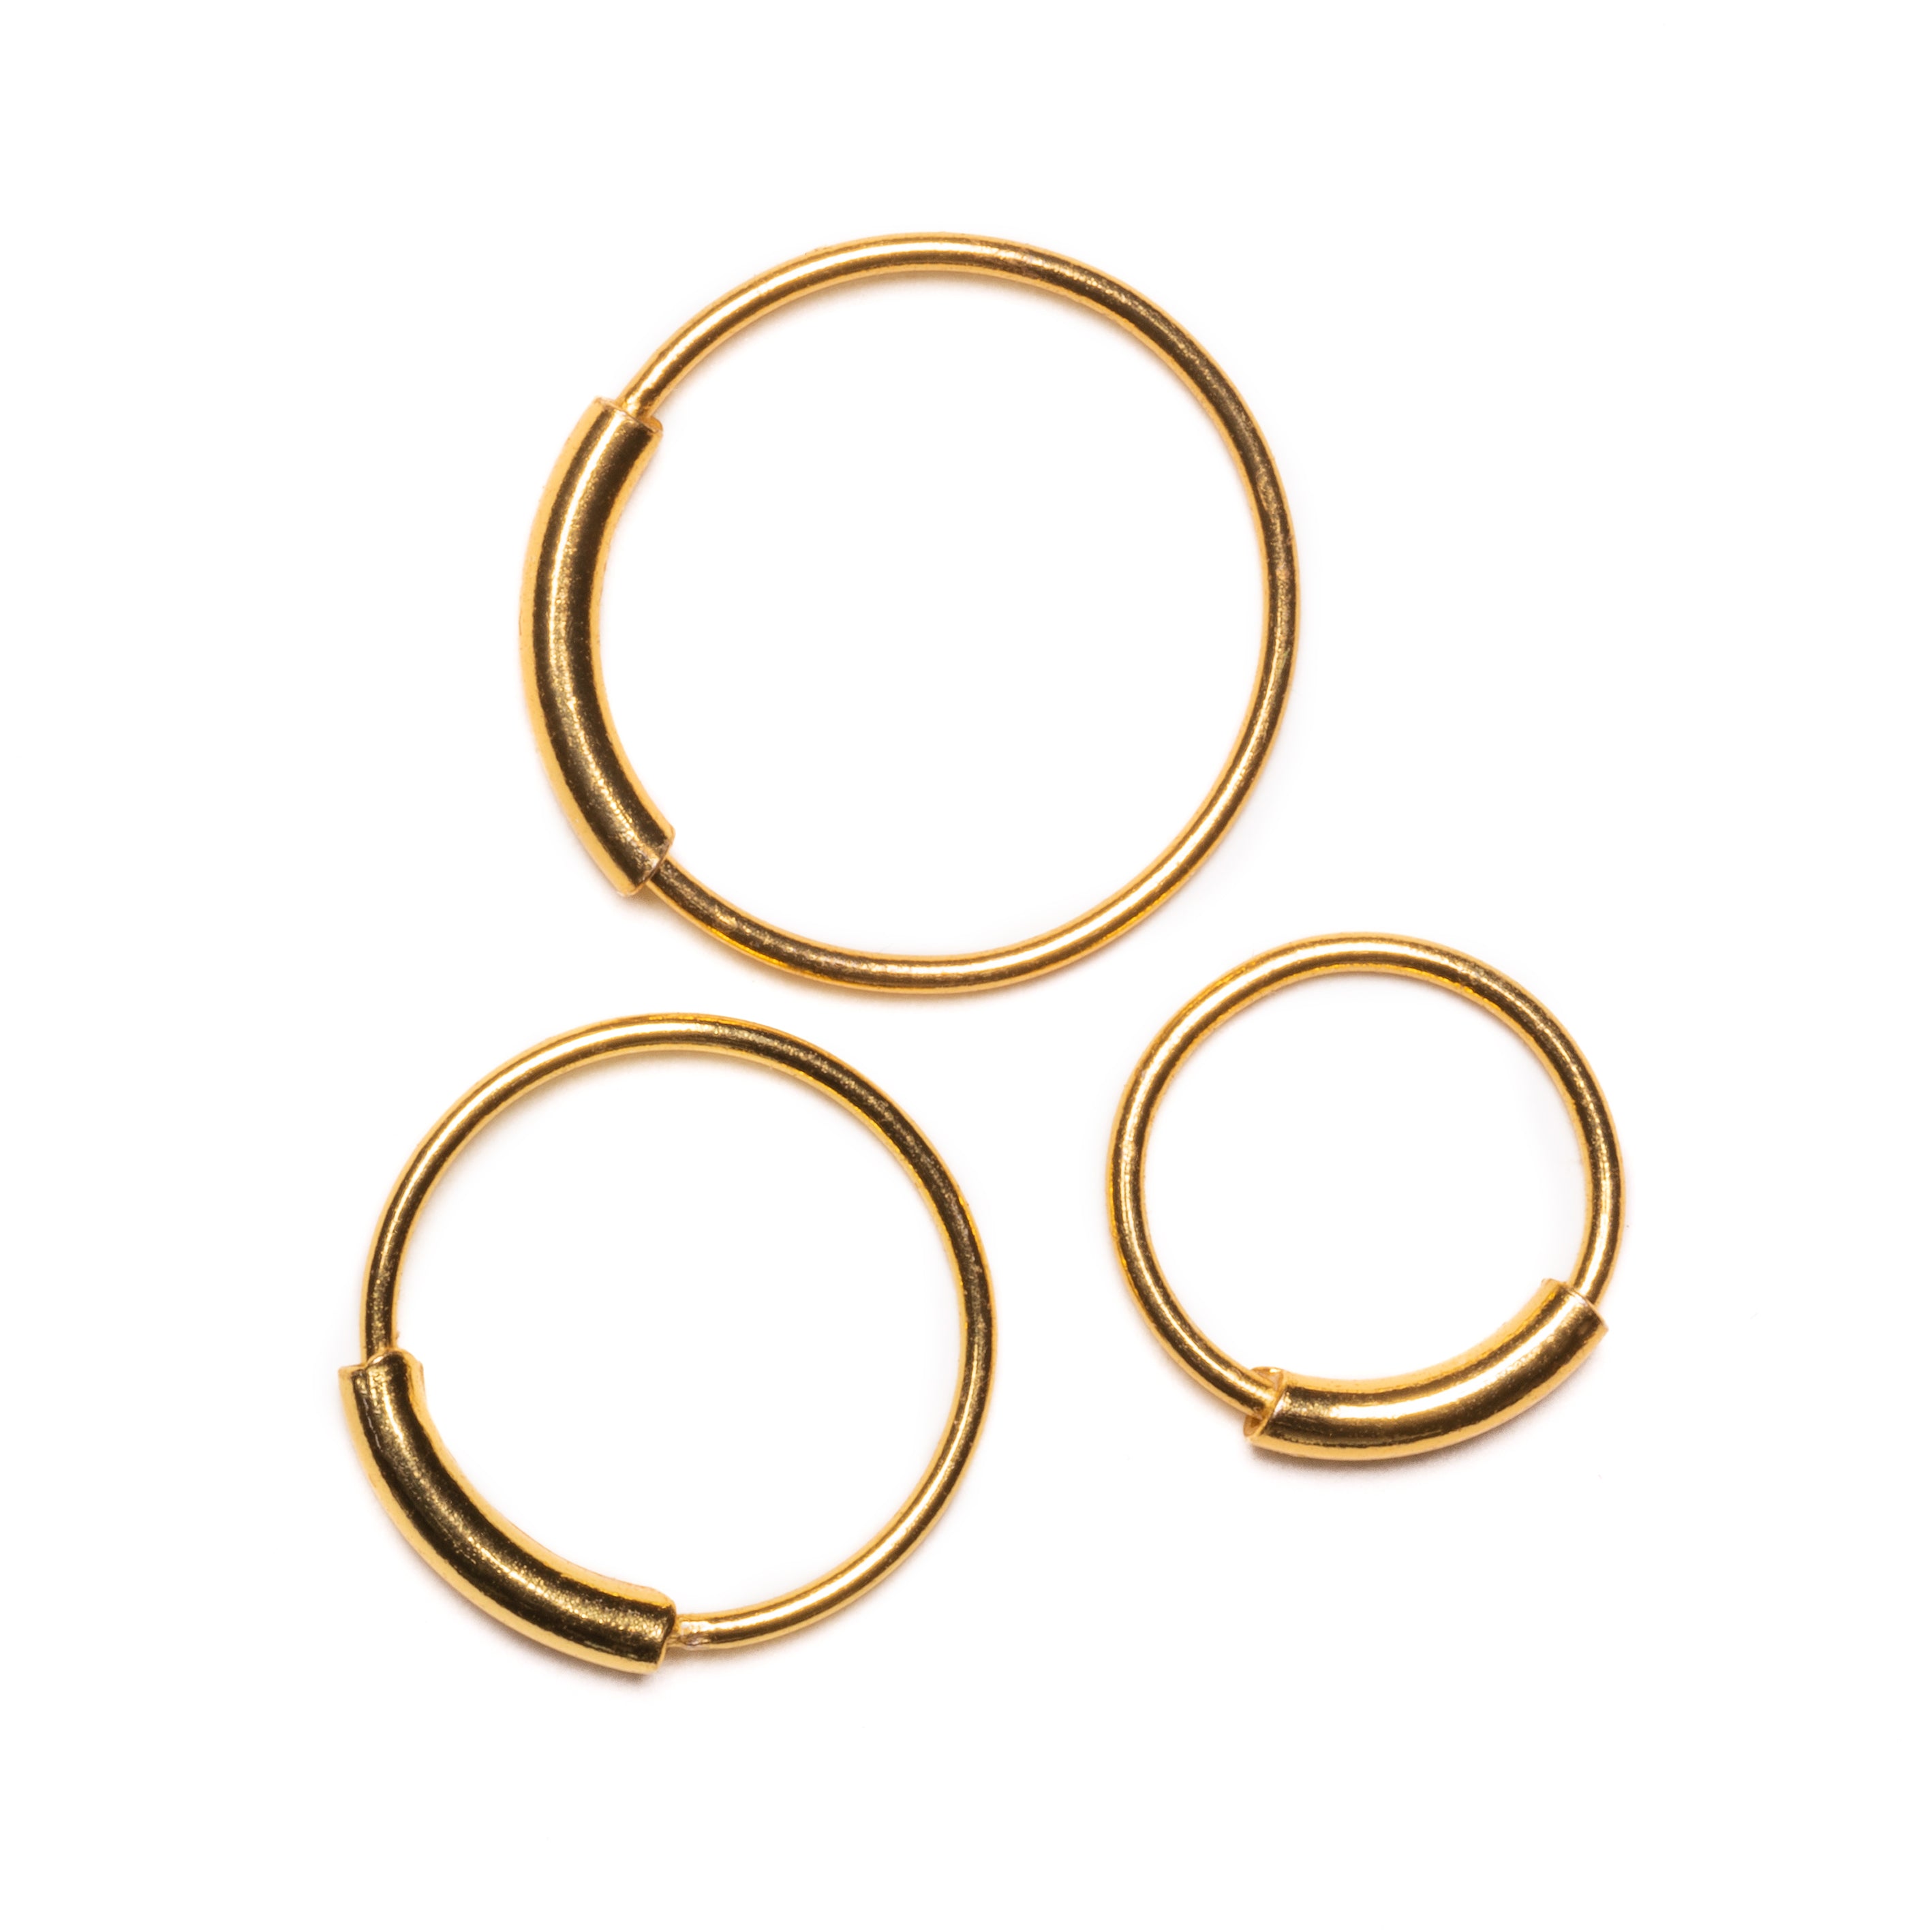 8mm, 10mm and 12mm Pirate 18k gold plated silver nose rings frontal view